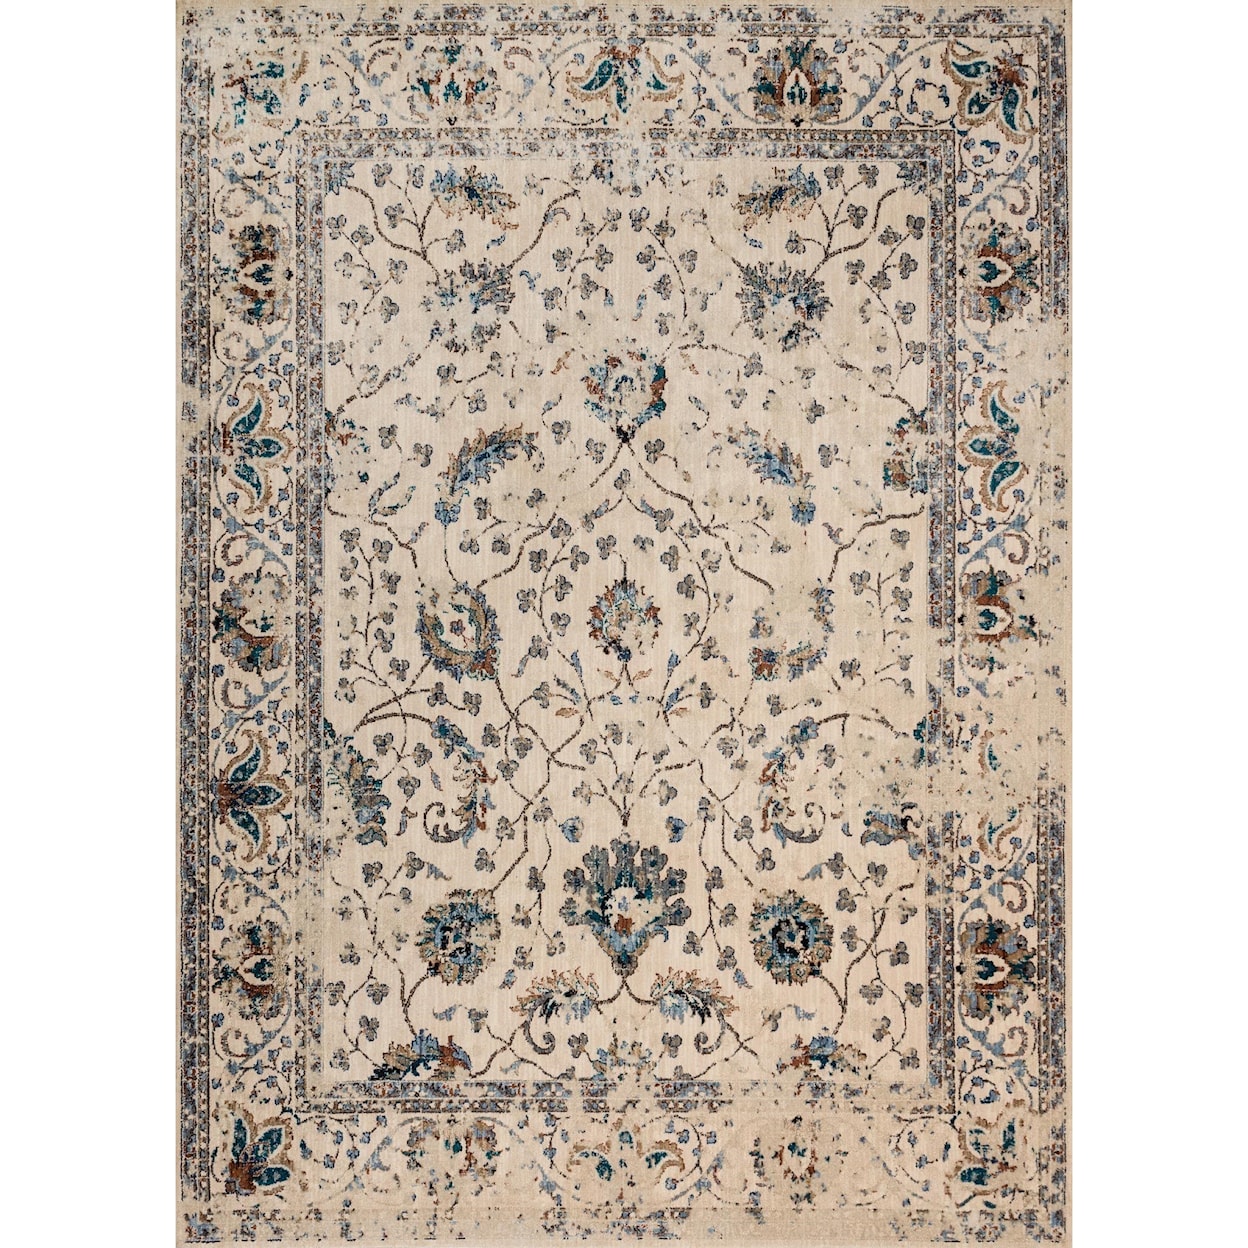 Magnolia Home by Joanna Gaines for Loloi Kivi 5' 3" X 5' 3" Round Rug